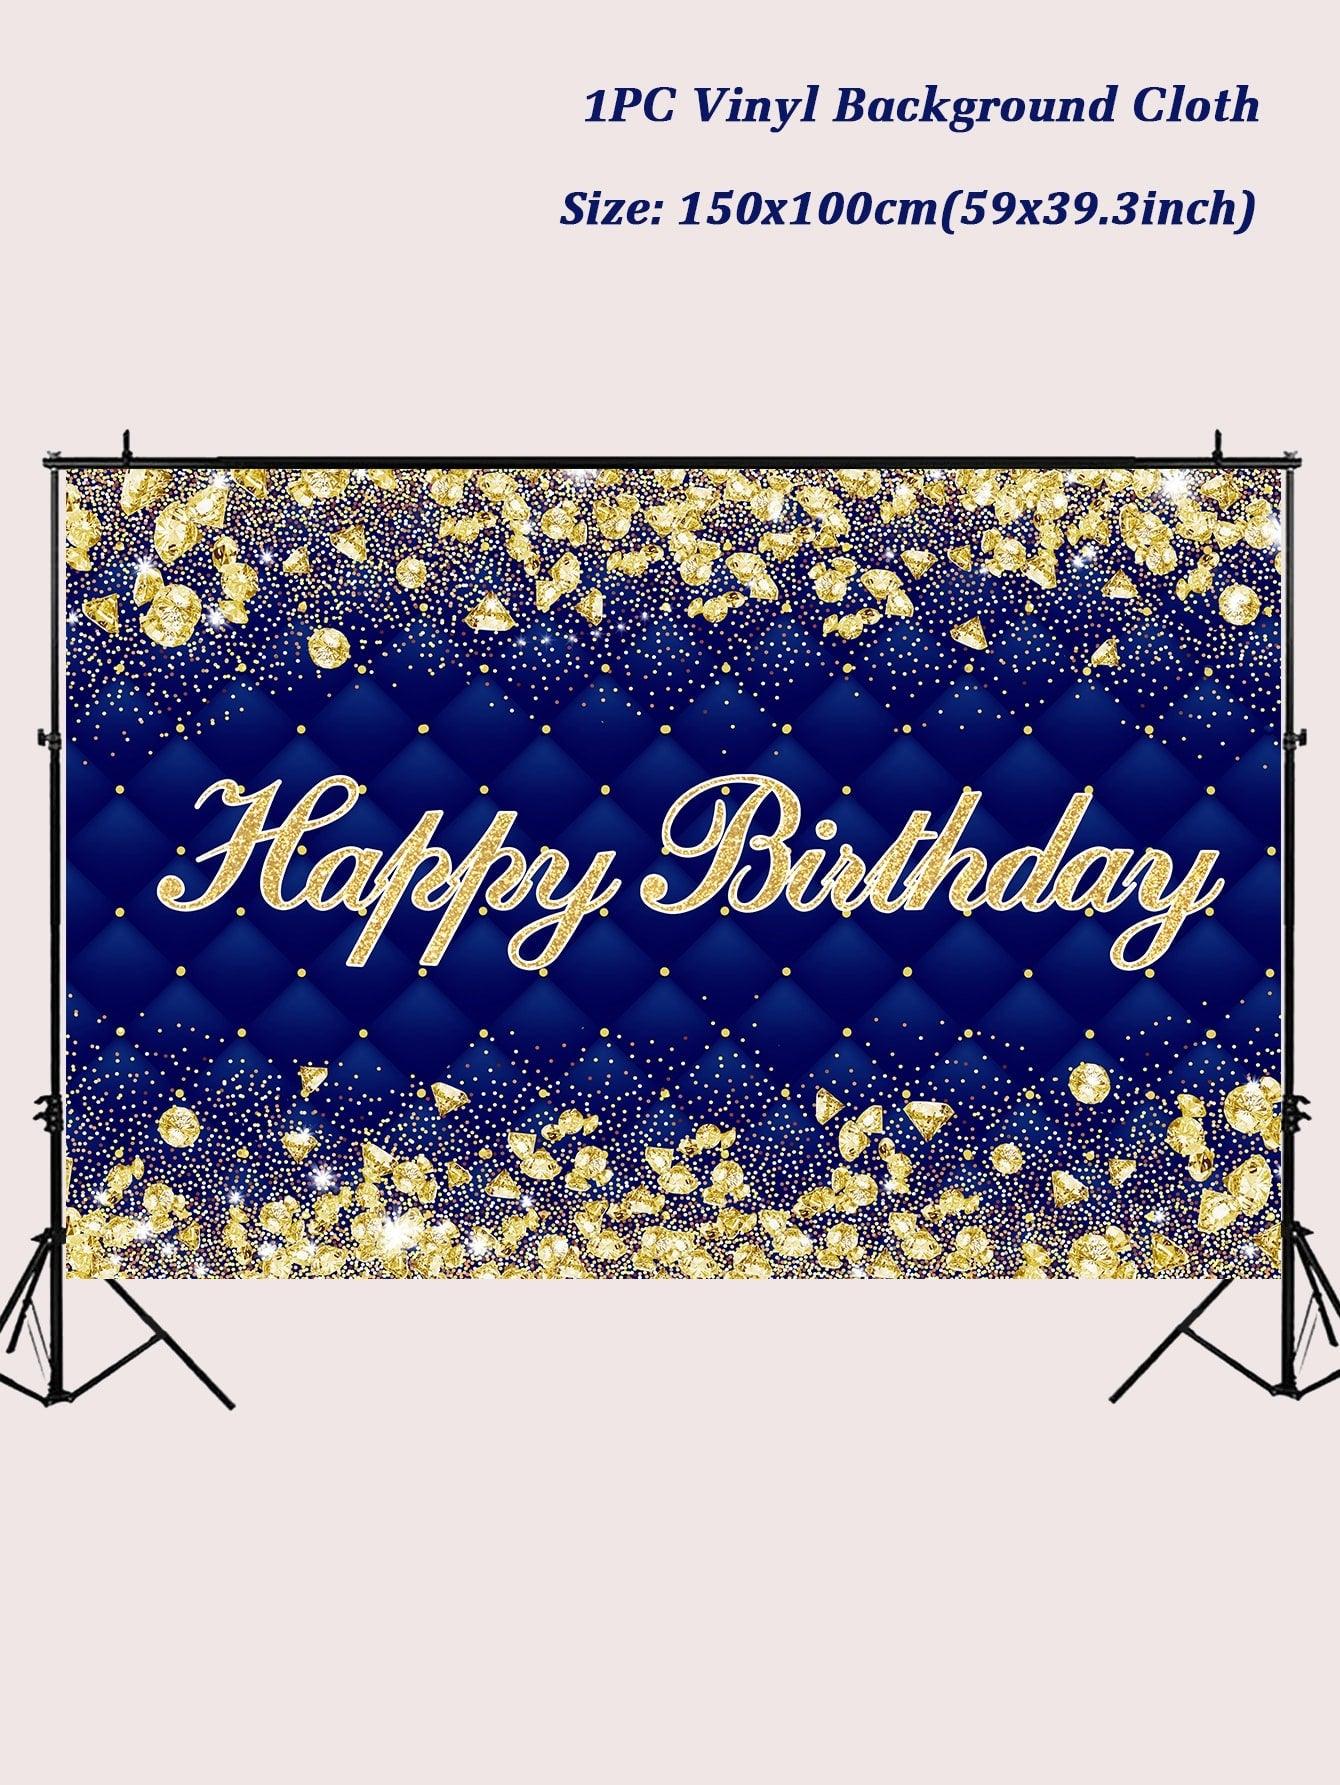 1pc Black Gold Metallic Birthday Party Banner - If you say i do